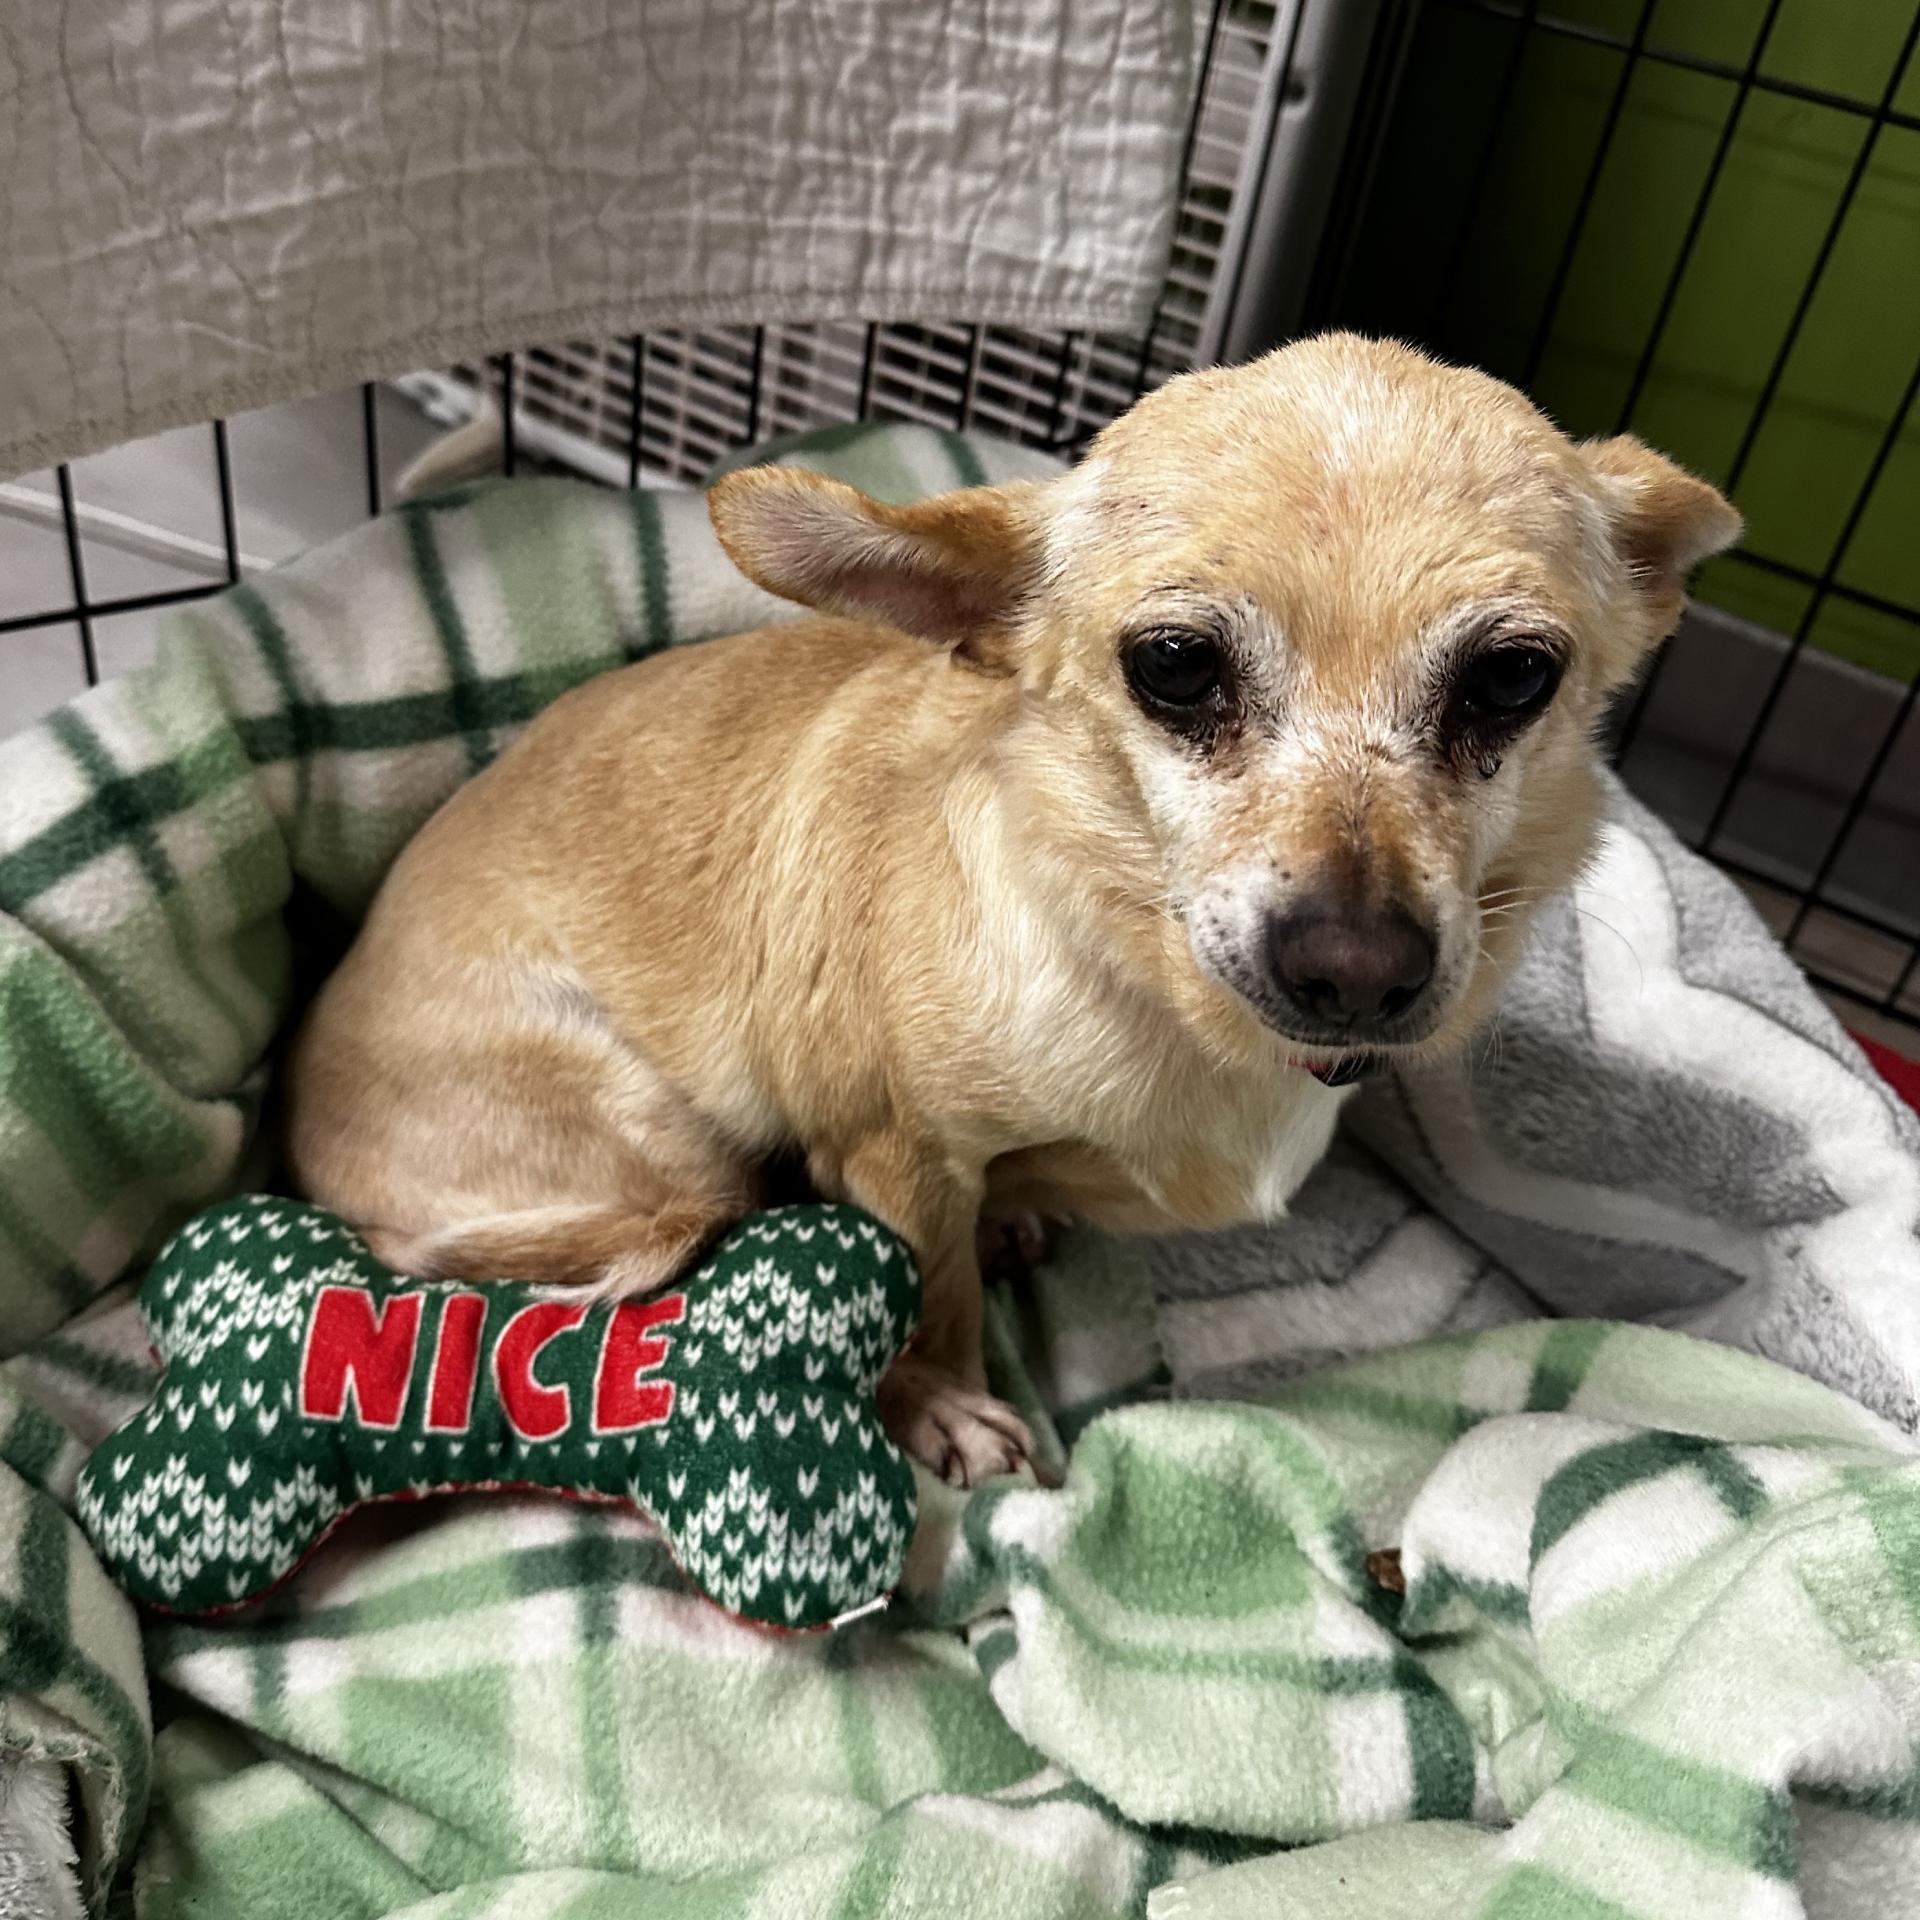 Matilda the chihuahua sitting on a Christmas blanket